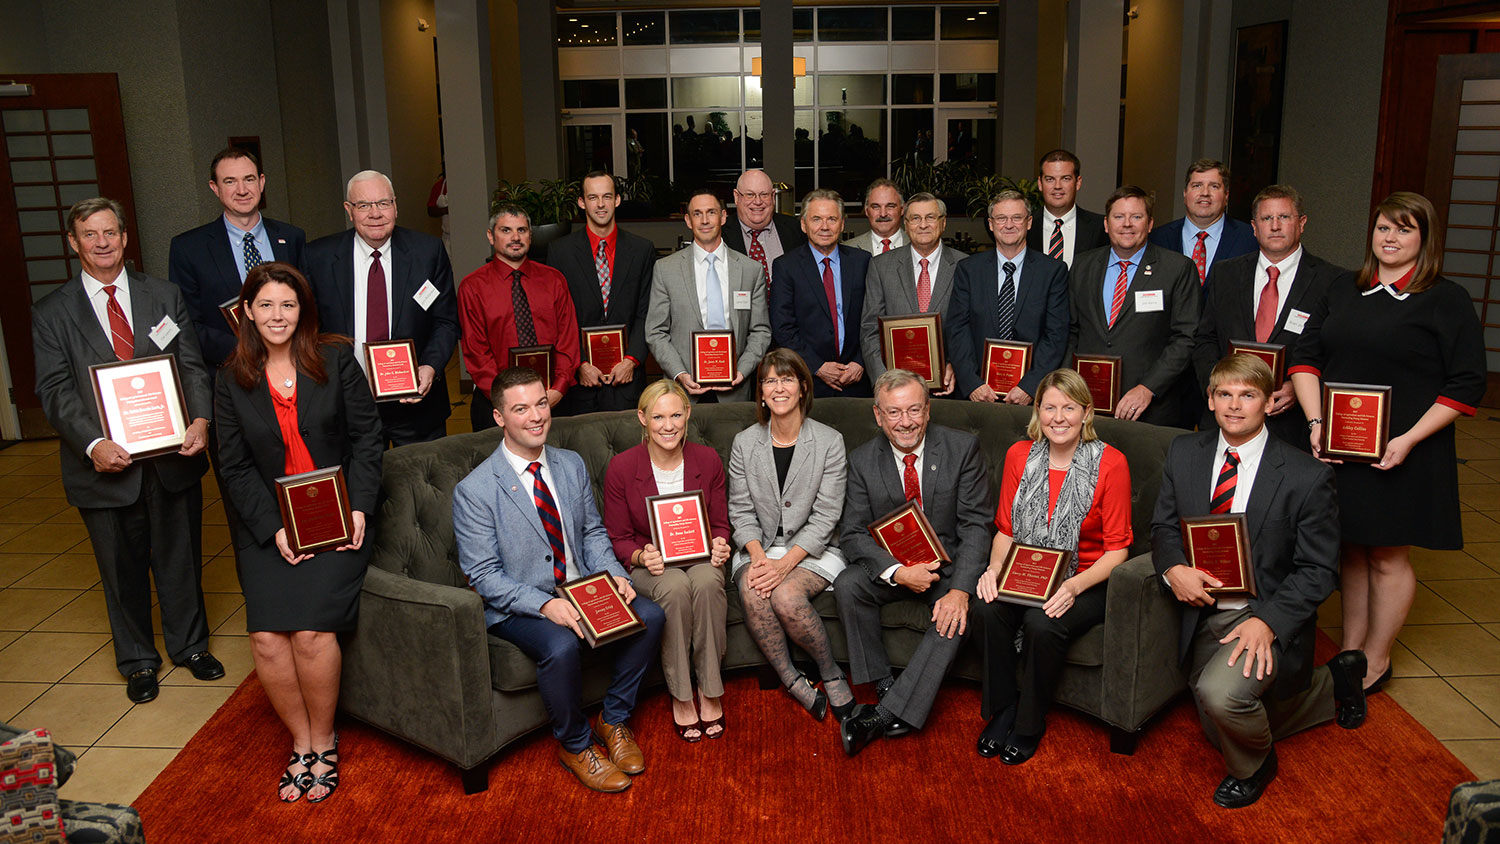 CALS alumni award winners gathered for a group shot at the ceremony